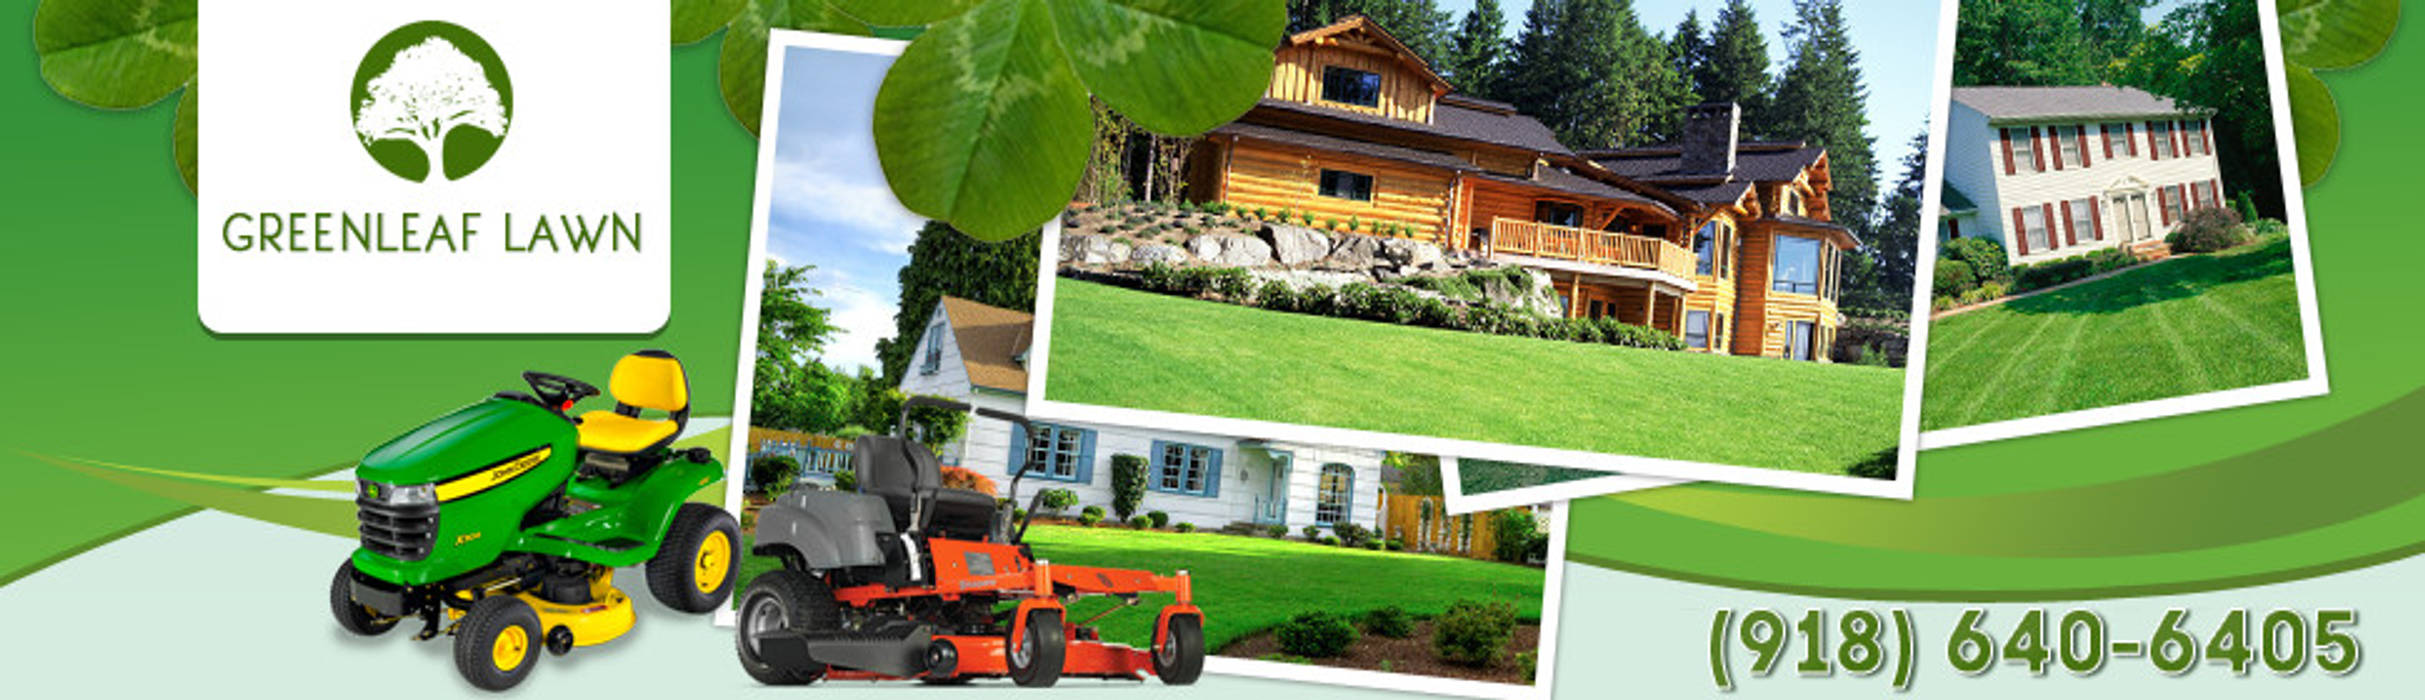 Main Reasons To Get Professional Lawn Care Services, Real Estate Real Estate Дома в классическом стиле